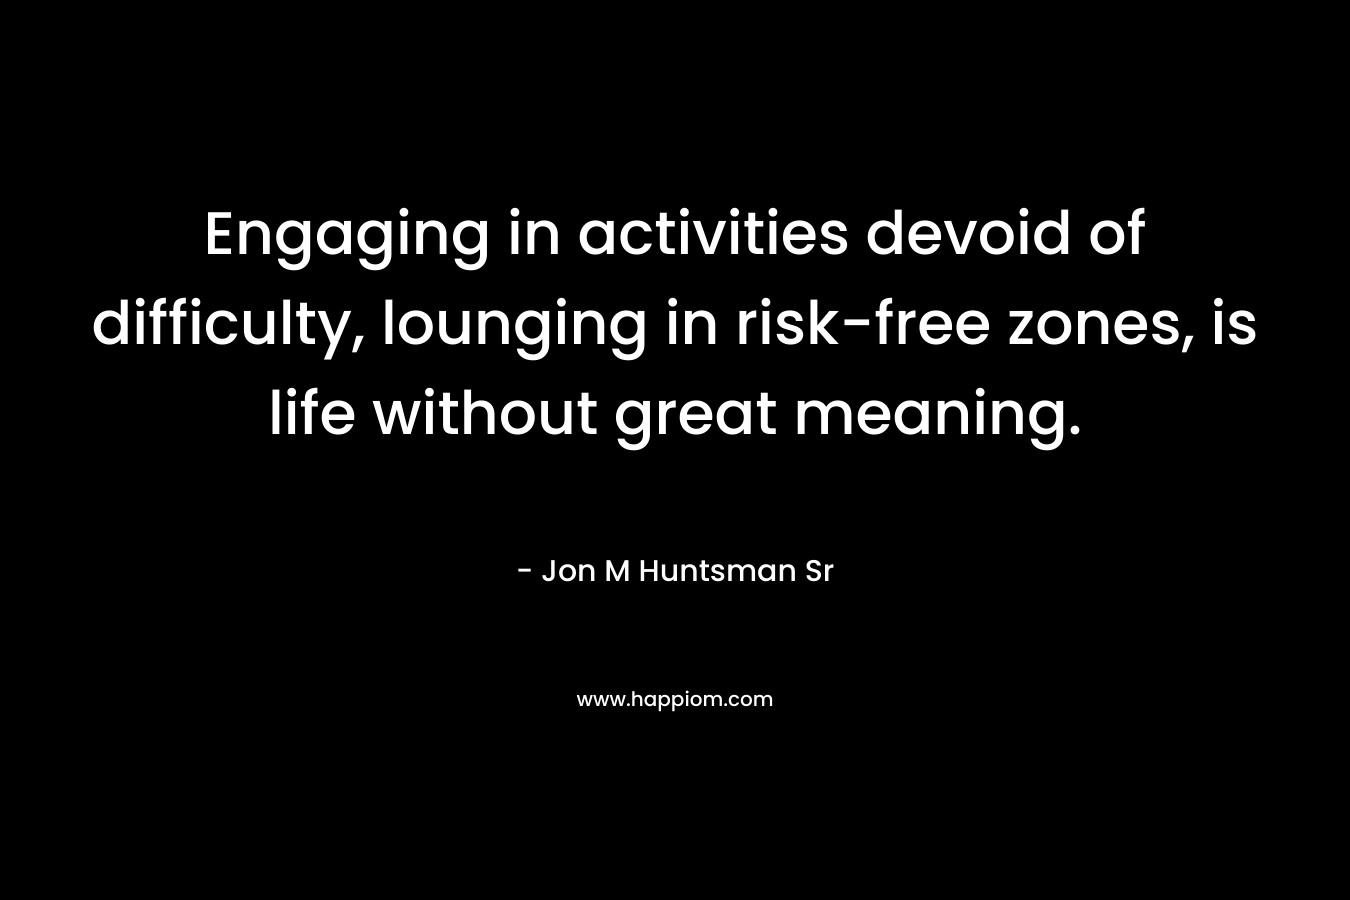 Engaging in activities devoid of difficulty, lounging in risk-free zones, is life without great meaning. – Jon M Huntsman Sr